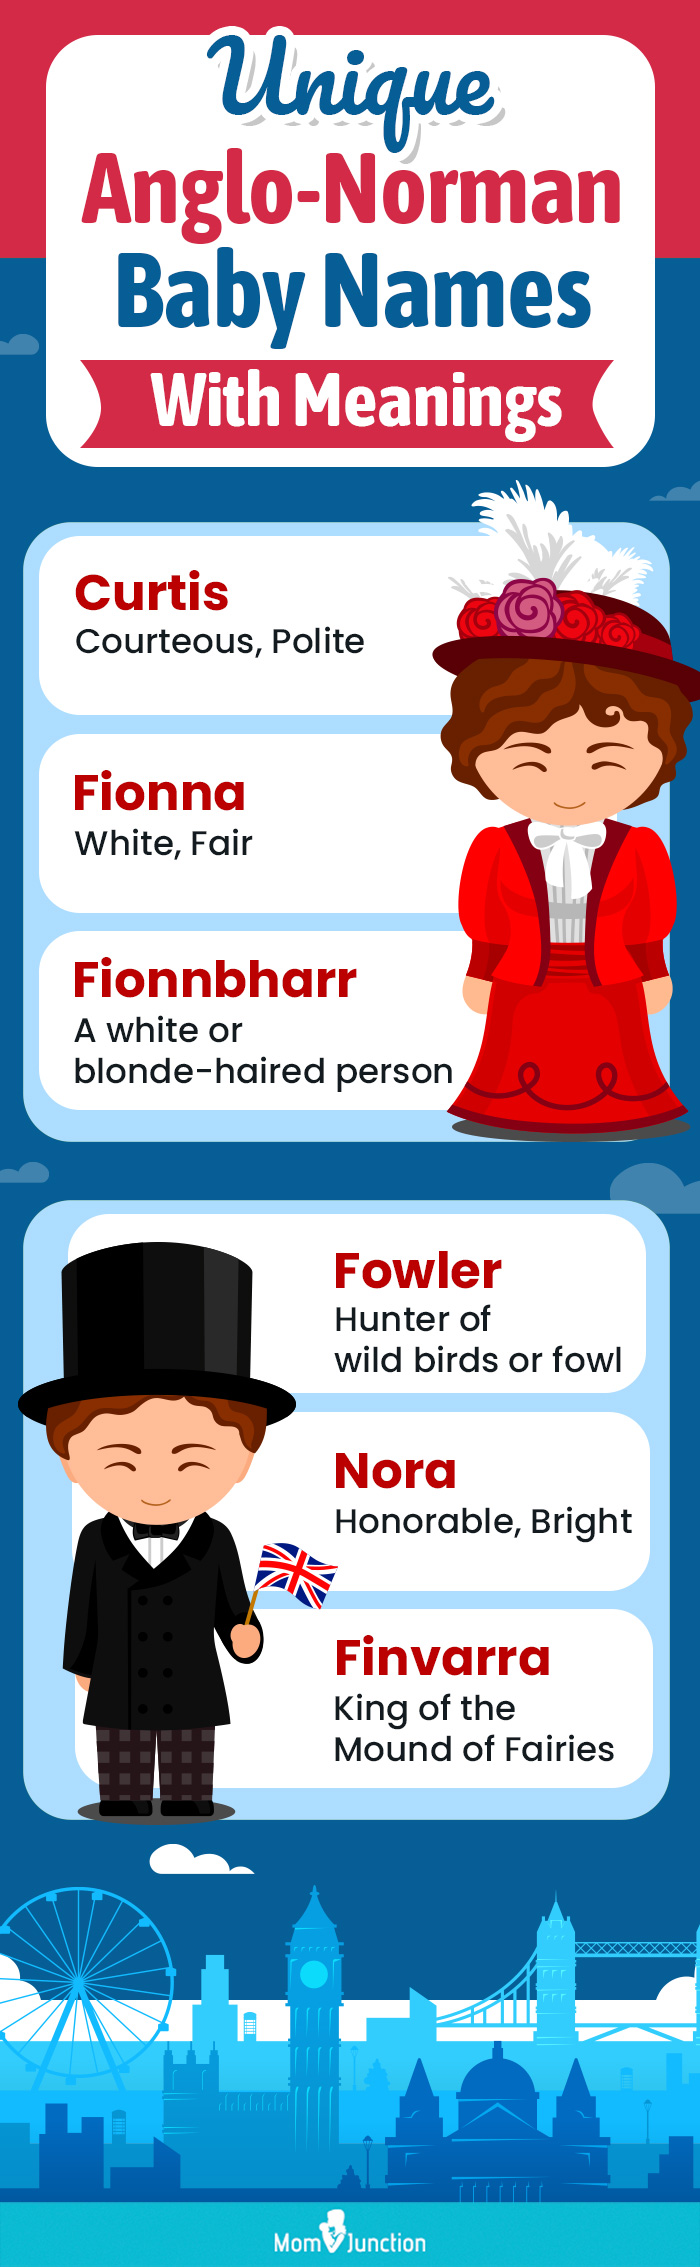 unique anglo norman baby names with meanings (infographic)